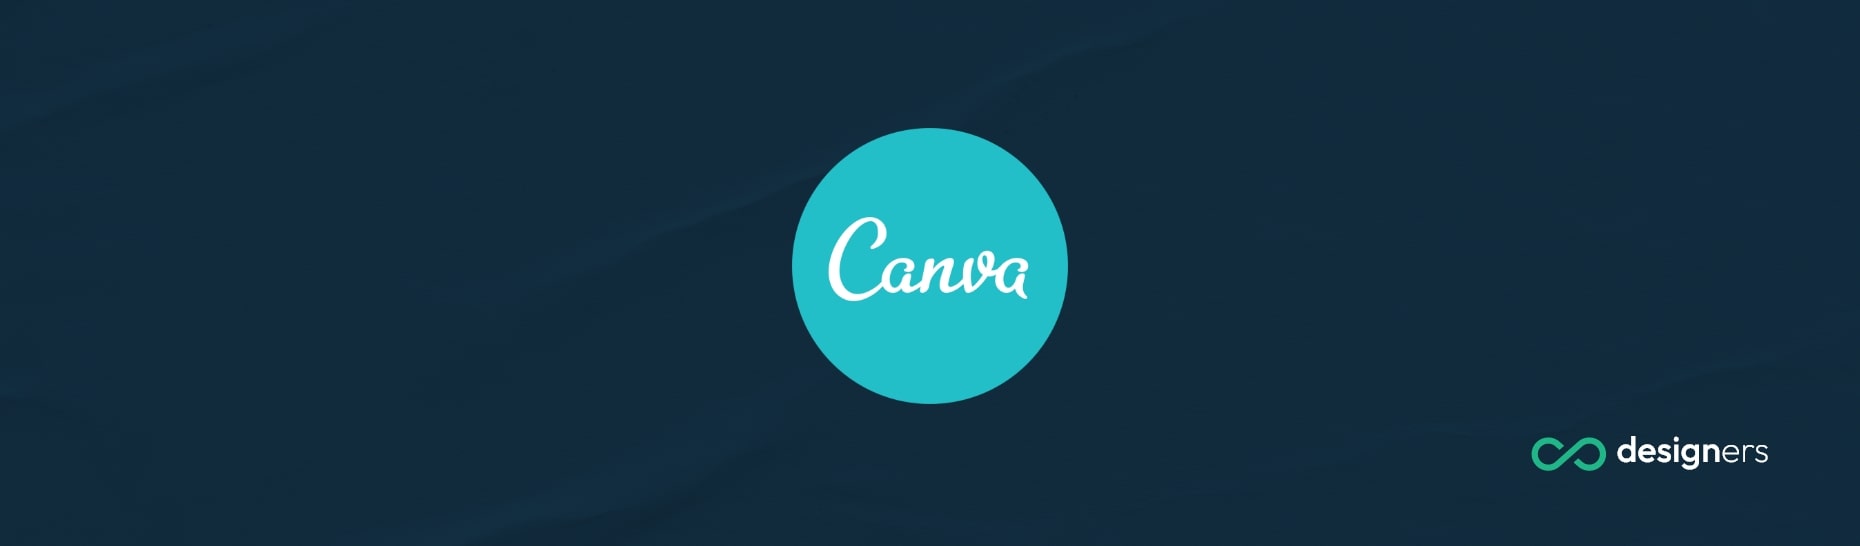 How Does Canva Make Their Money?